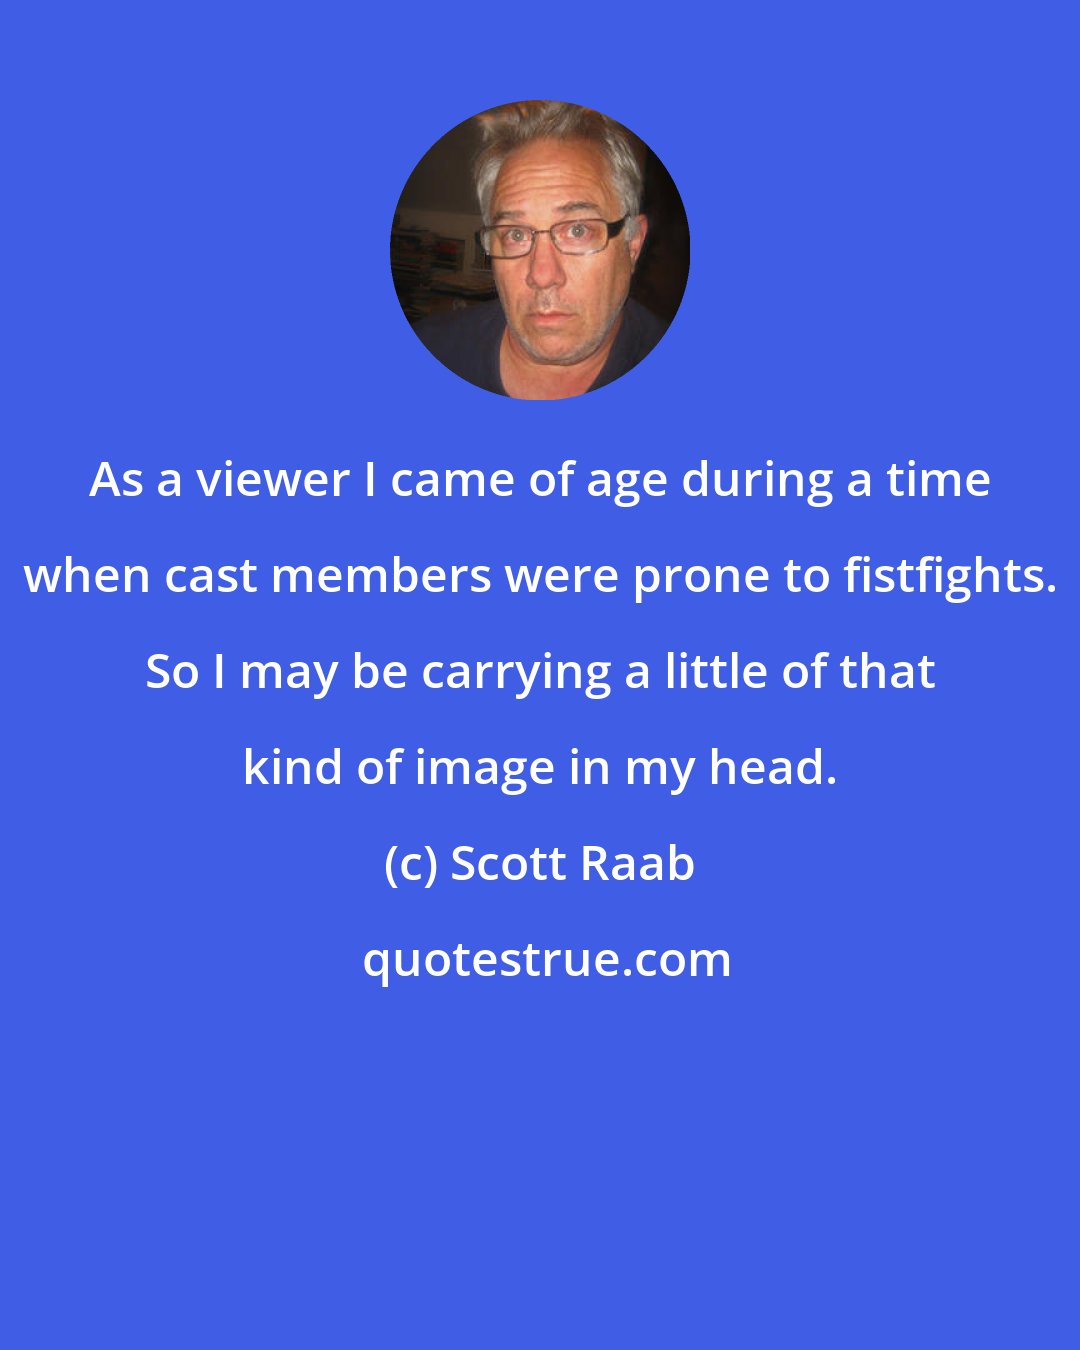 Scott Raab: As a viewer I came of age during a time when cast members were prone to fistfights. So I may be carrying a little of that kind of image in my head.